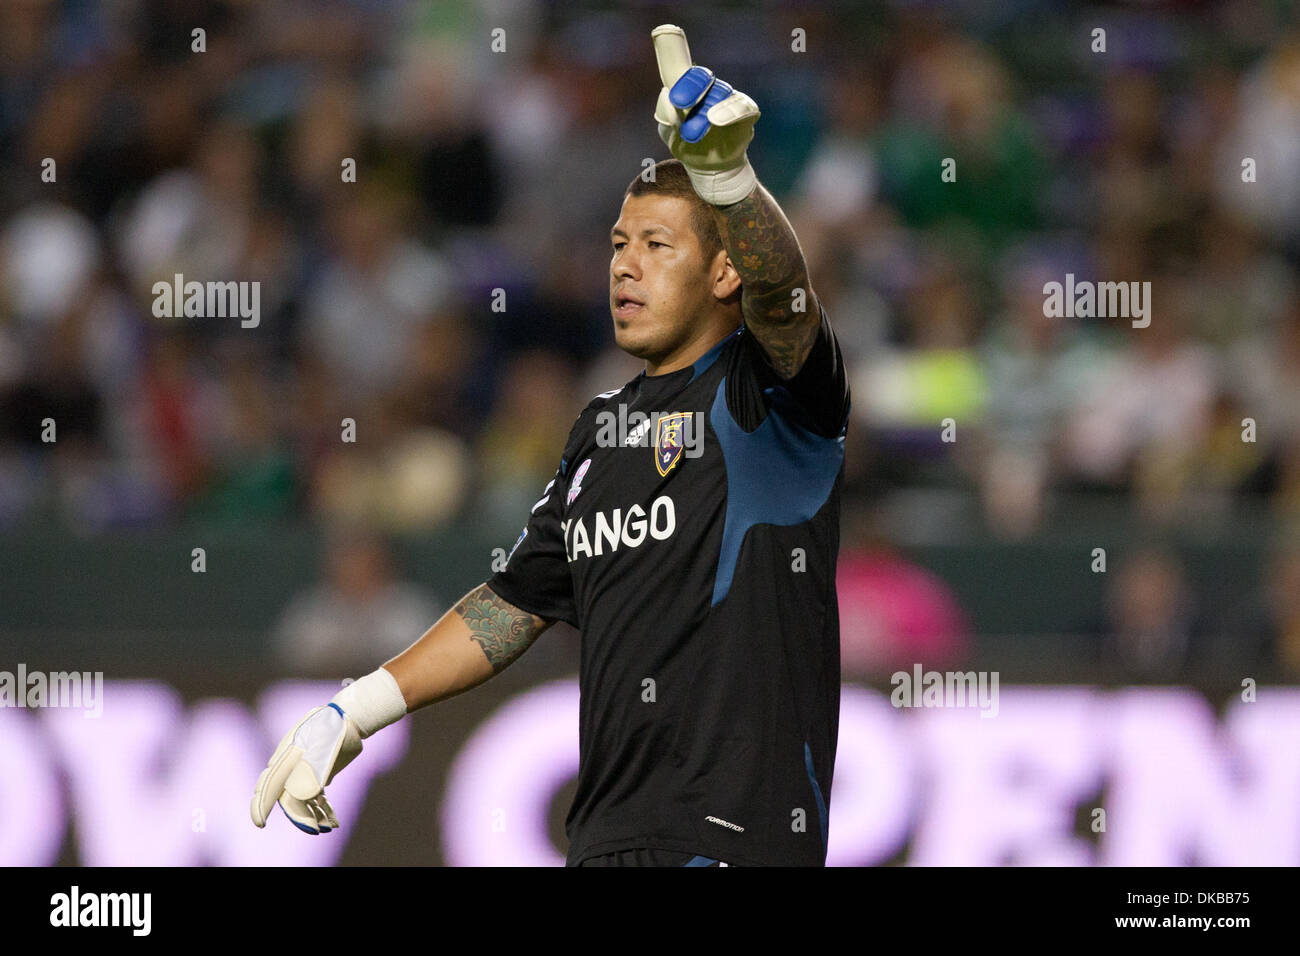 Oct. 1, 2011 - Carson, California, U.S - Real Salt Lake goalkeeper Nick Rimando #18 during the Major League Soccer game between Real Salt Lake and the Los Angeles Galaxy at the Home Depot Center. The Galaxy went on to defeat Real Salt Lake with a final score of 2-1. (Credit Image: © Brandon Parry/Southcreek/ZUMAPRESS.com) Stock Photo